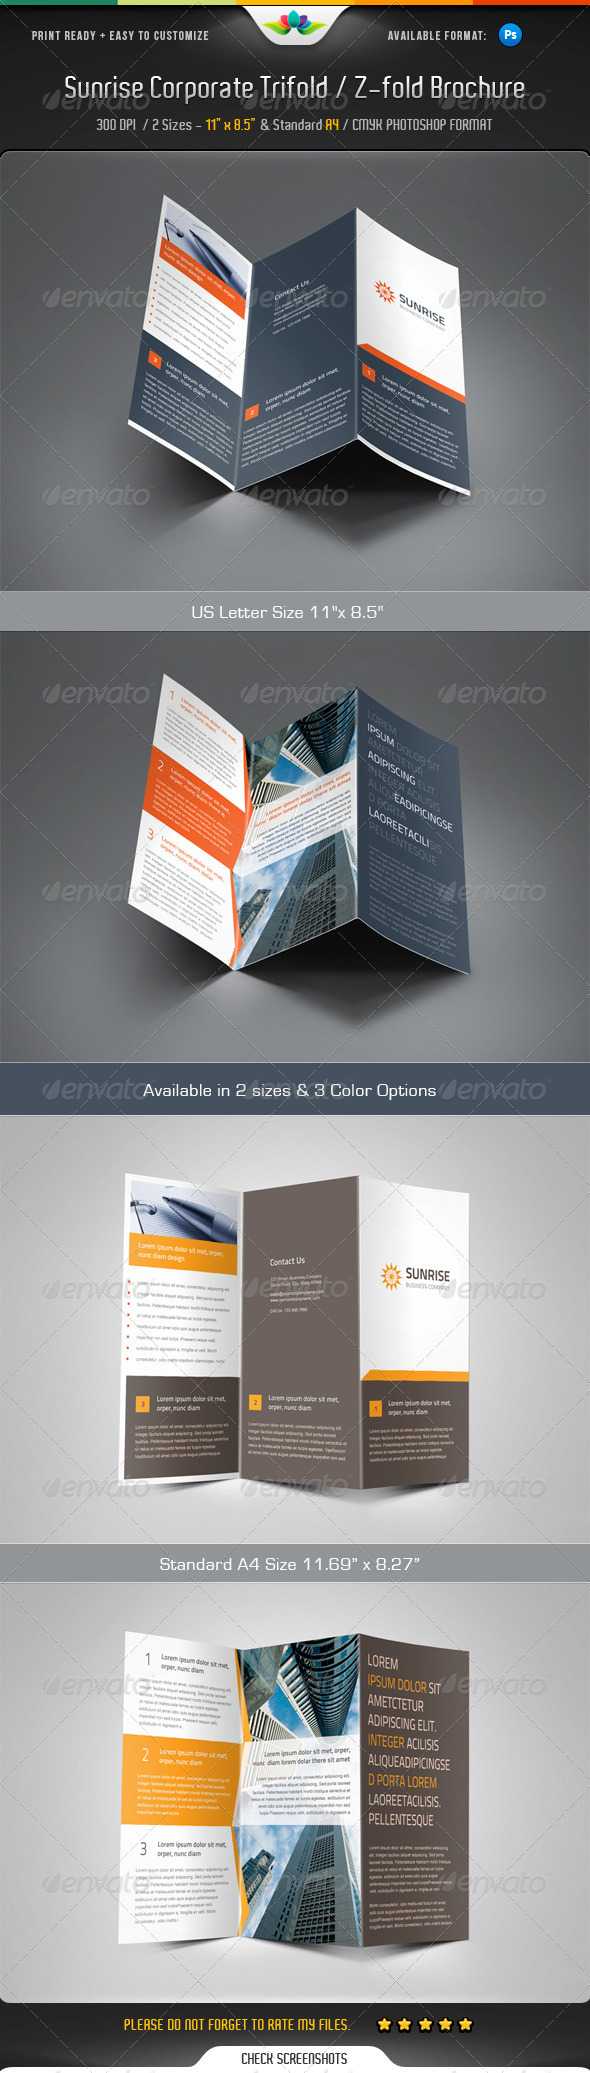 Z Fold Brochure Templates From Graphicriver For Z Fold Brochure Template Indesign